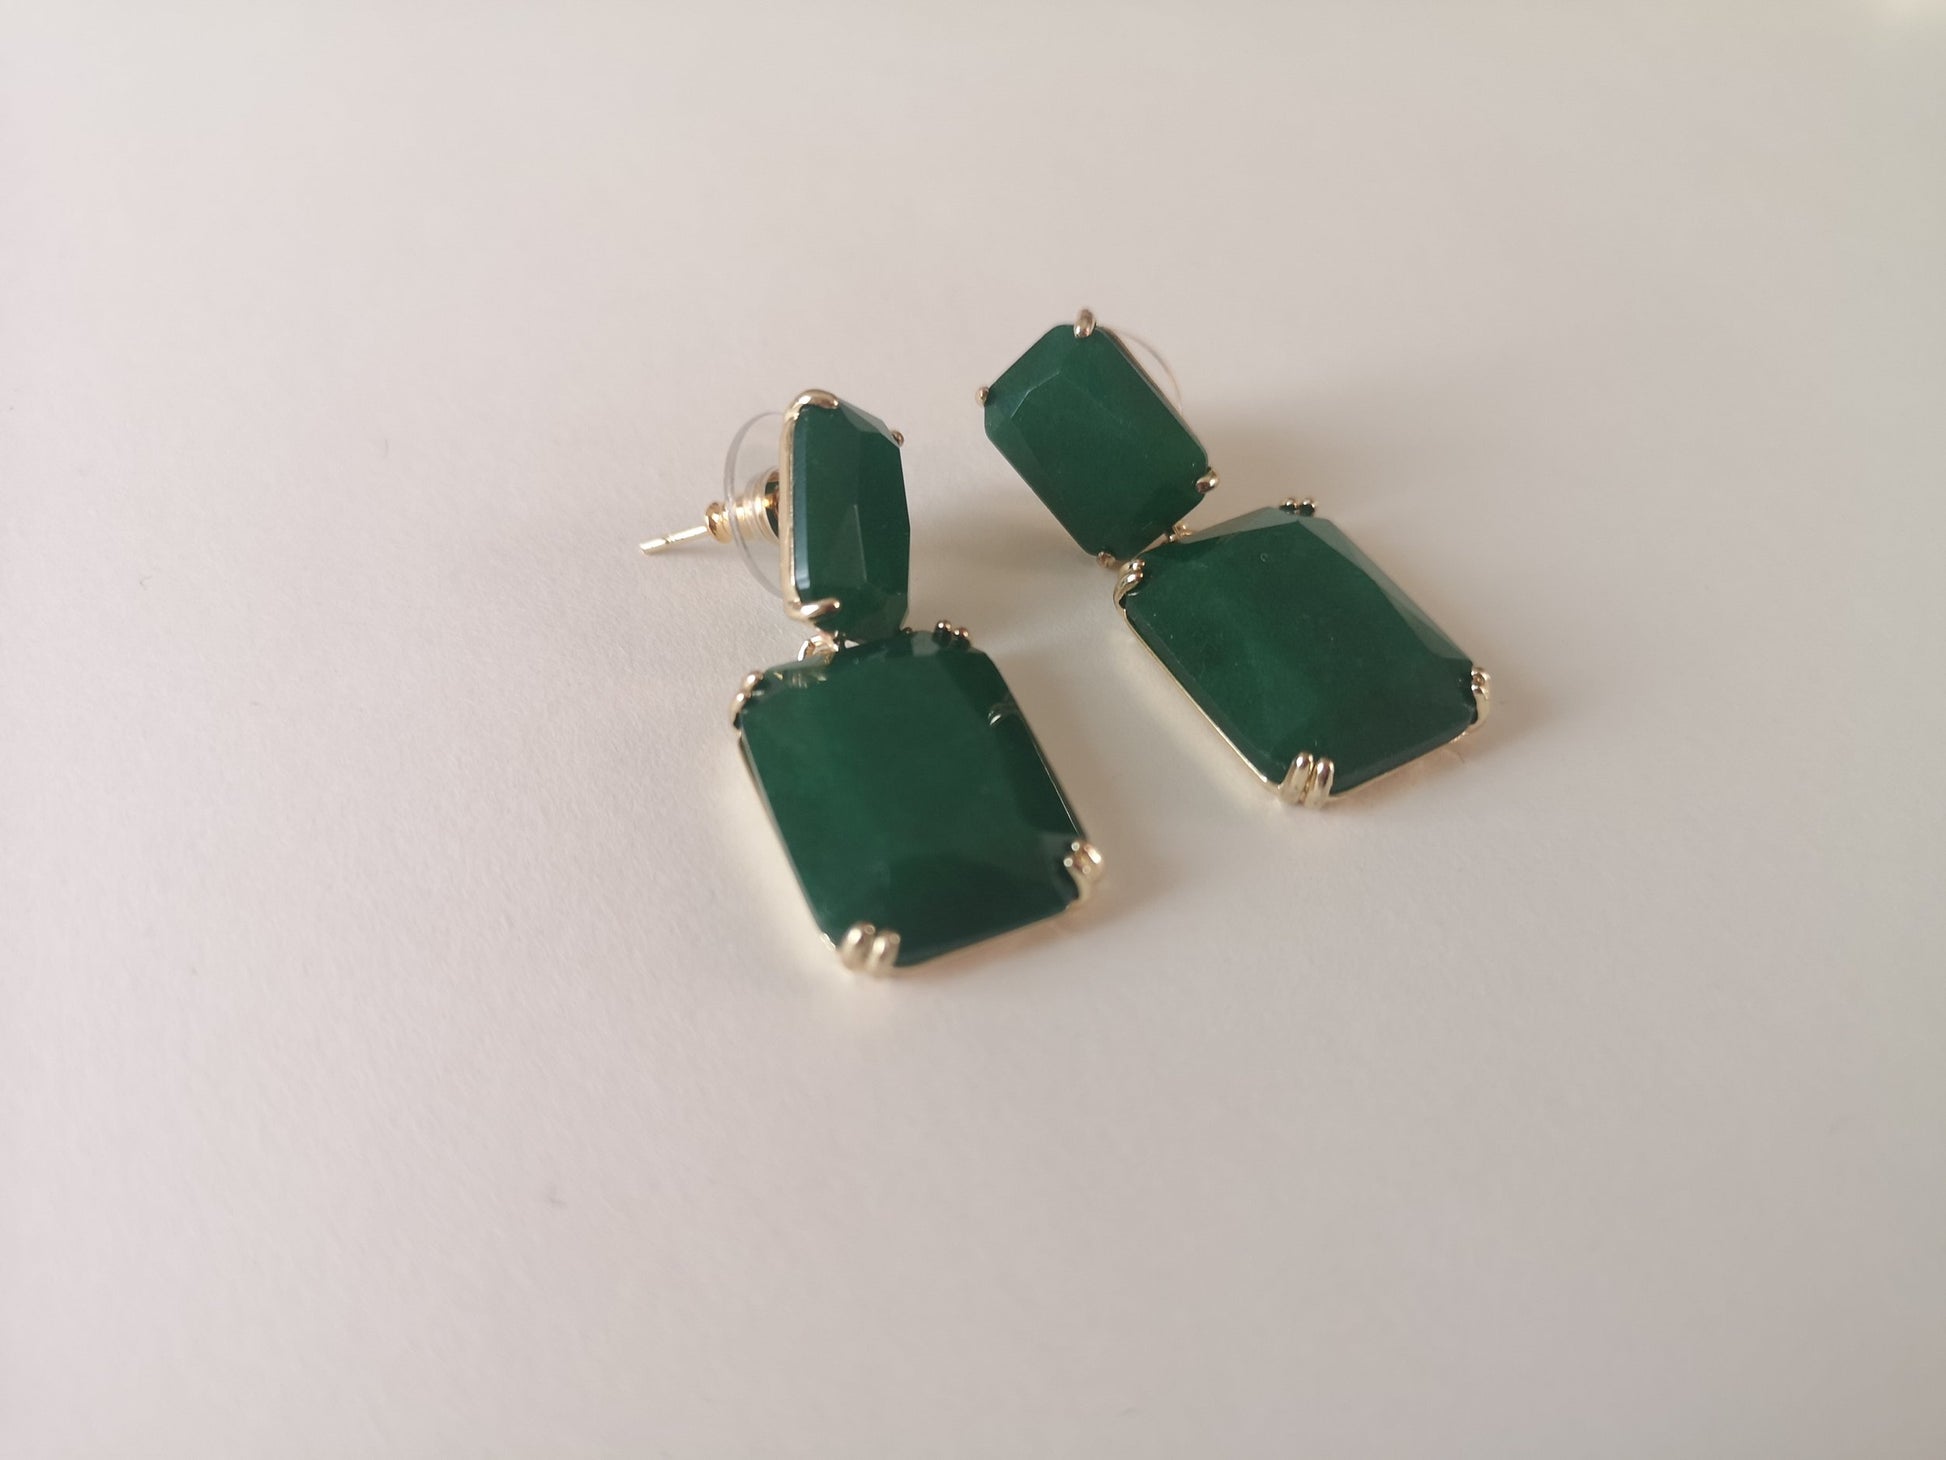 Annabelle Hardie - The Wild Baby Earrings (forest green)